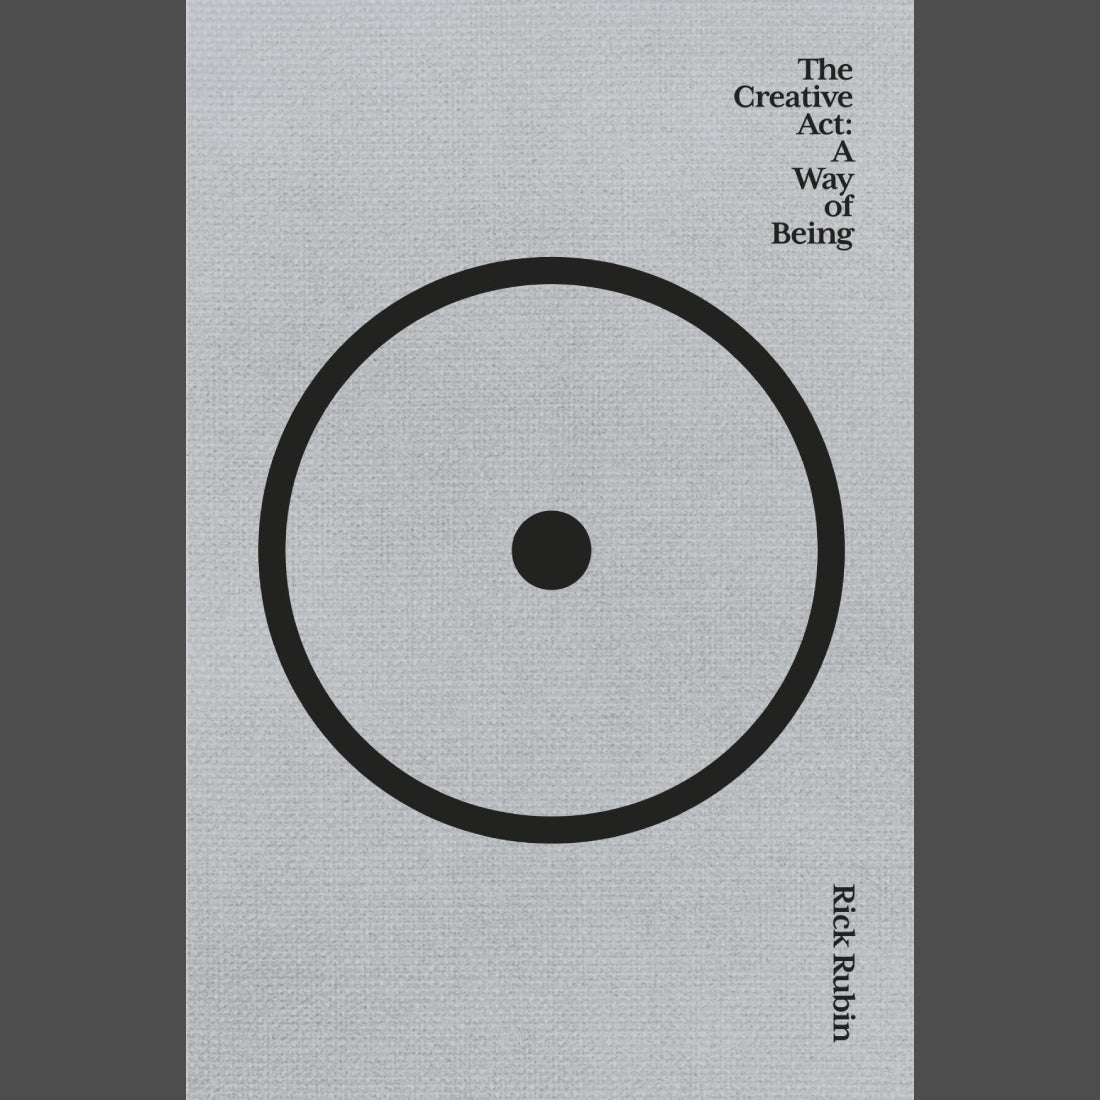 Rick Rubin - The Creative Act | Buy the book from Flying Nun Records